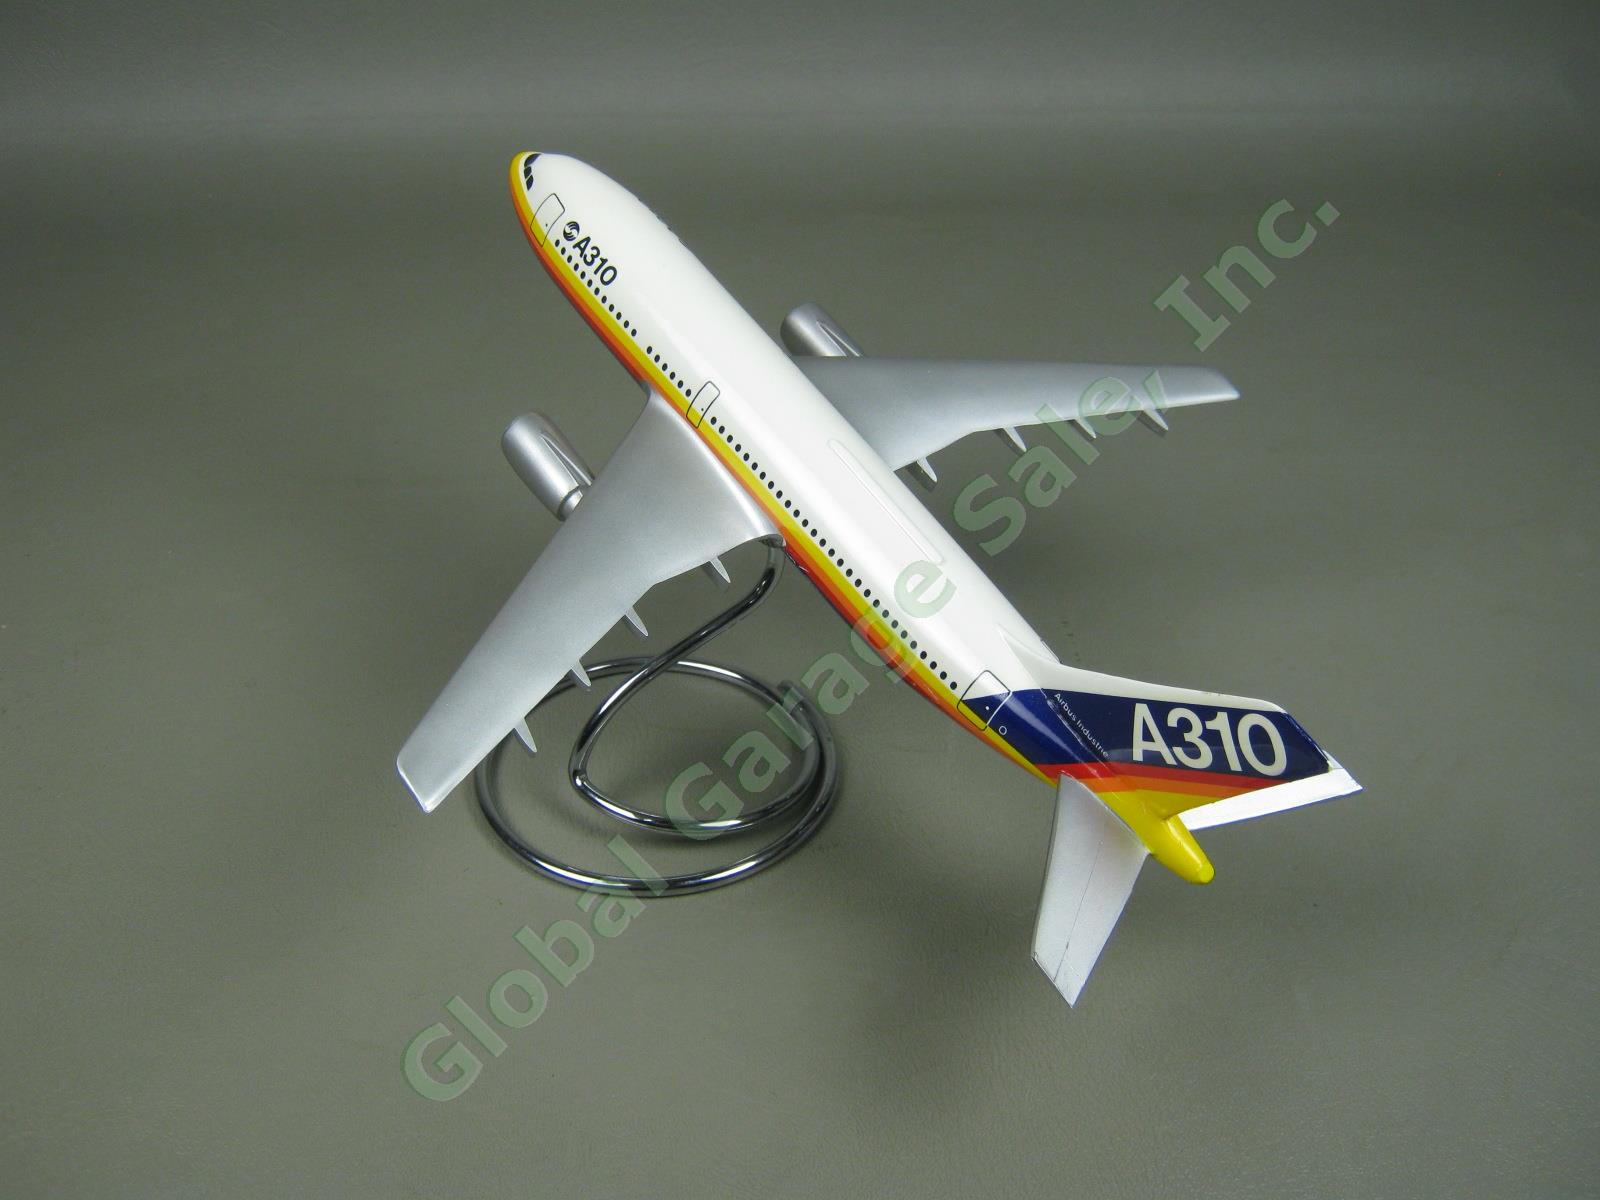 Airbus Industrie A310-203 Desktop Display Model Airline Aircraft Airplane 9.25" 2